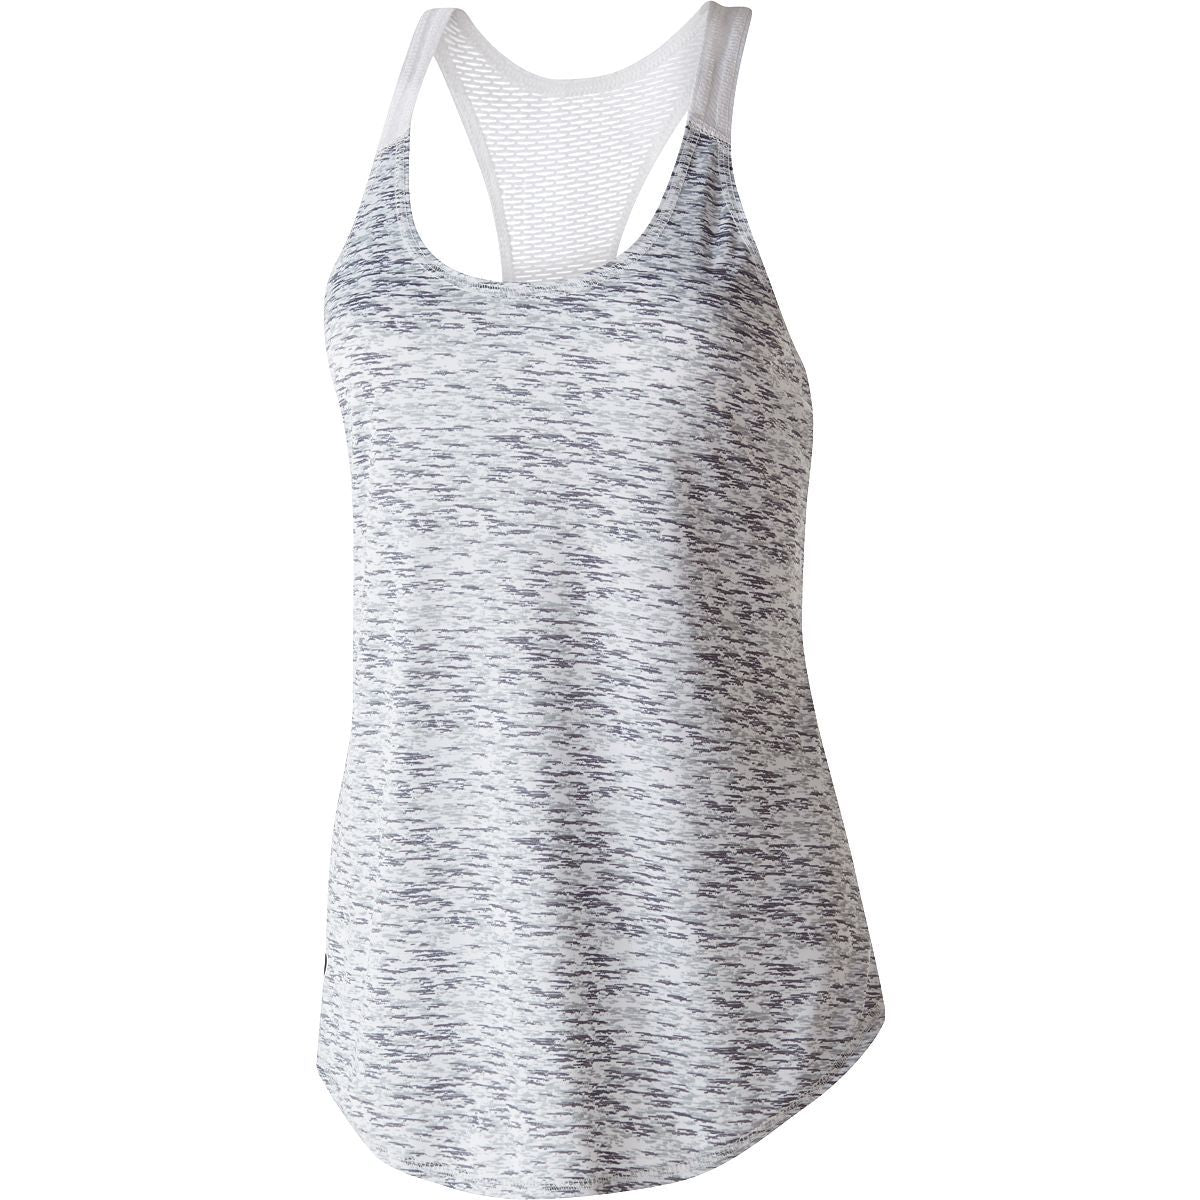 Holloway Ladies Space Dye Tank in Silver/White  -Part of the Ladies, Ladies-Tank, Holloway, Shirts product lines at KanaleyCreations.com